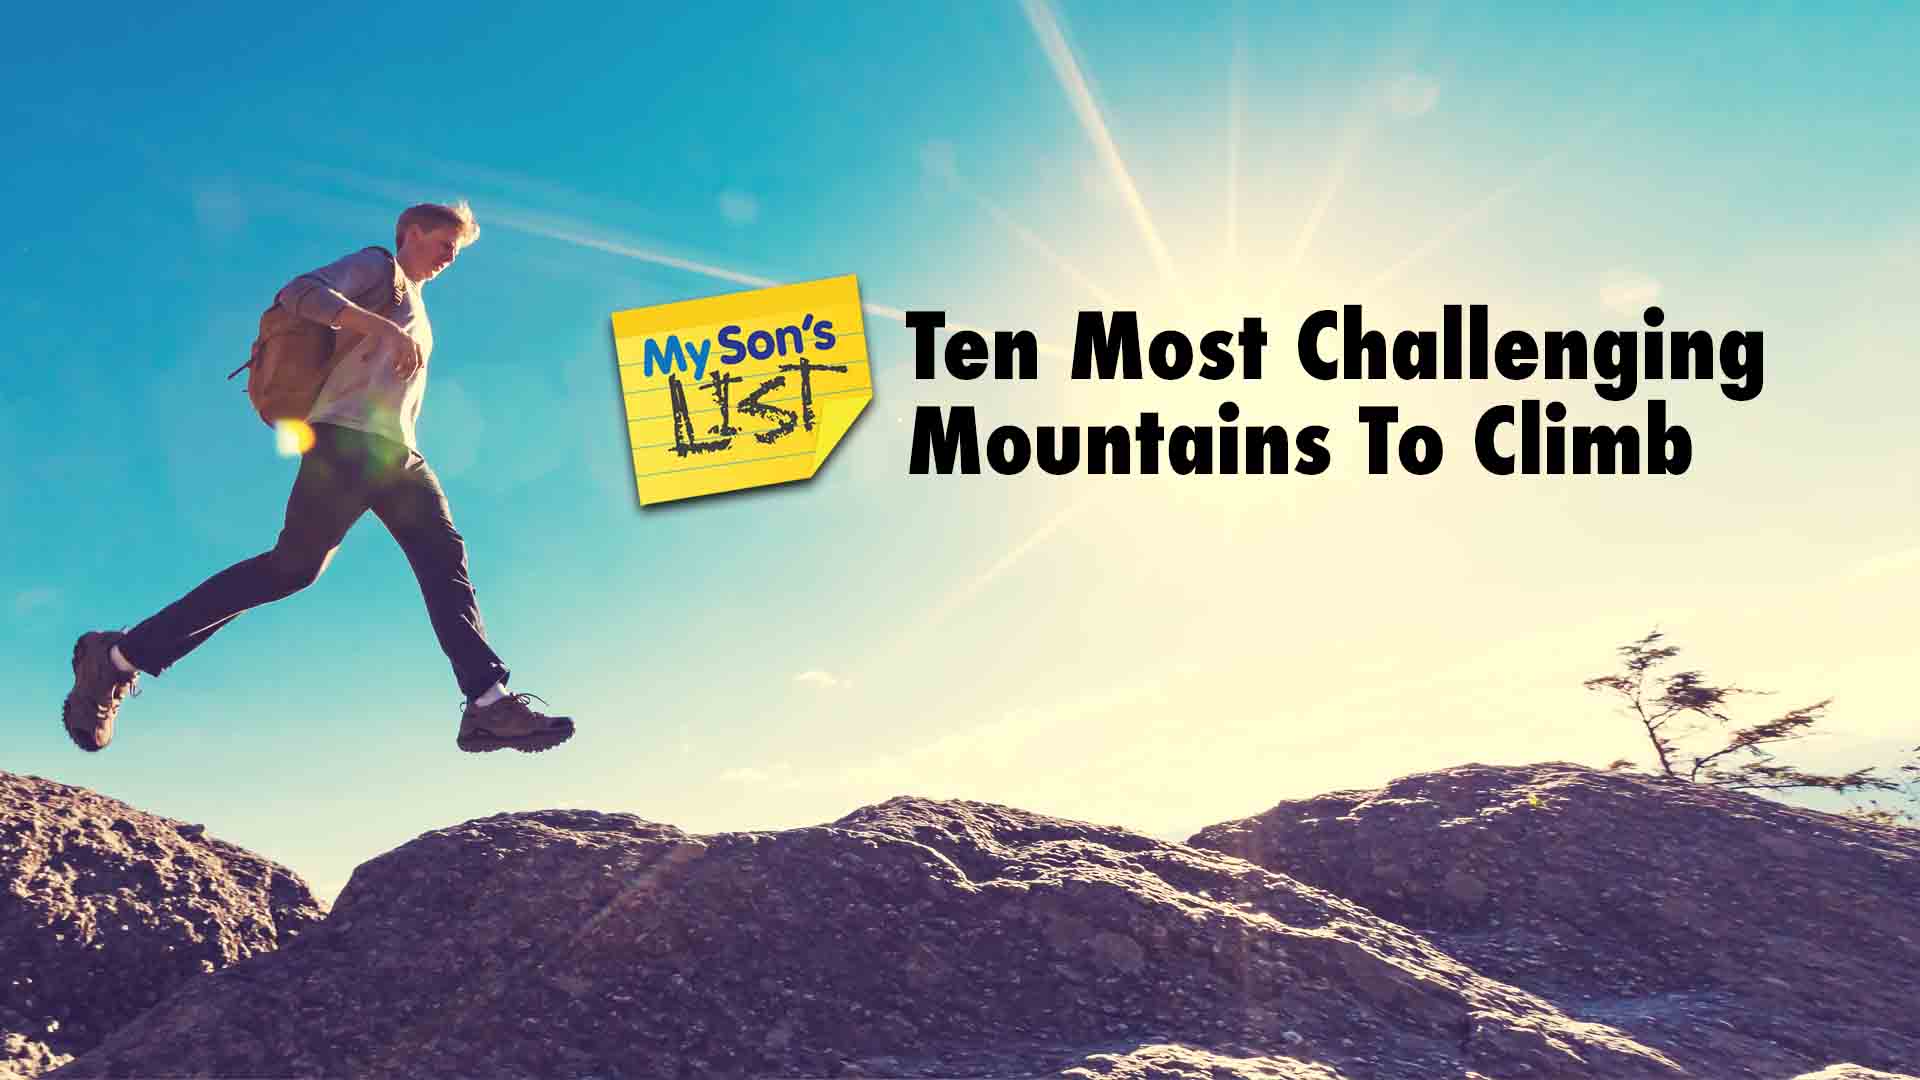 My Sons List of Top Ten most challenging mountains to climb